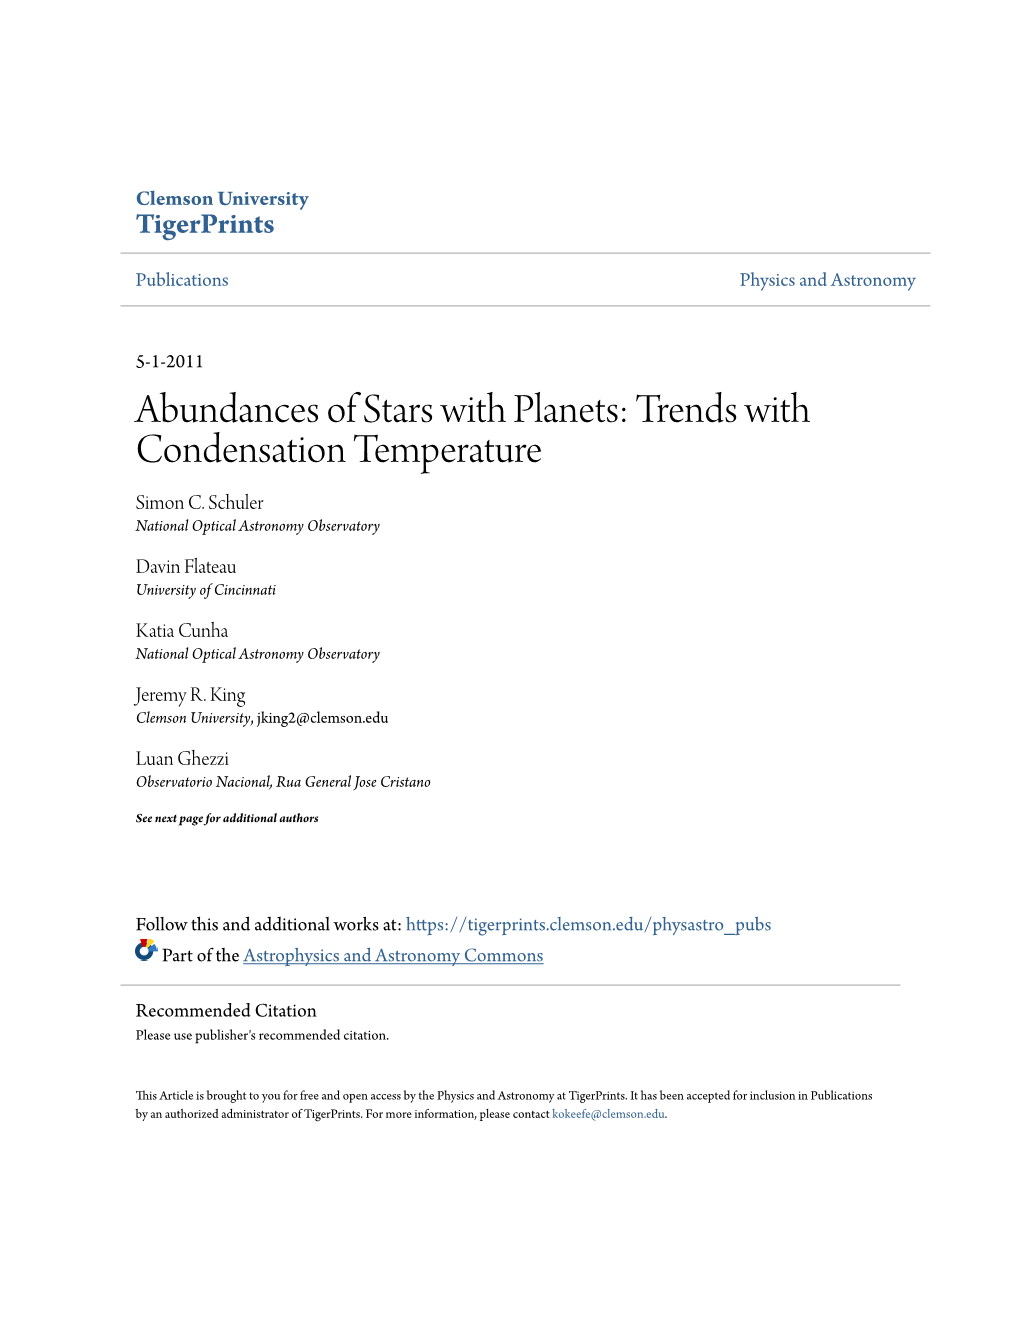 Abundances of Stars with Planets: Trends with Condensation Temperature Simon C